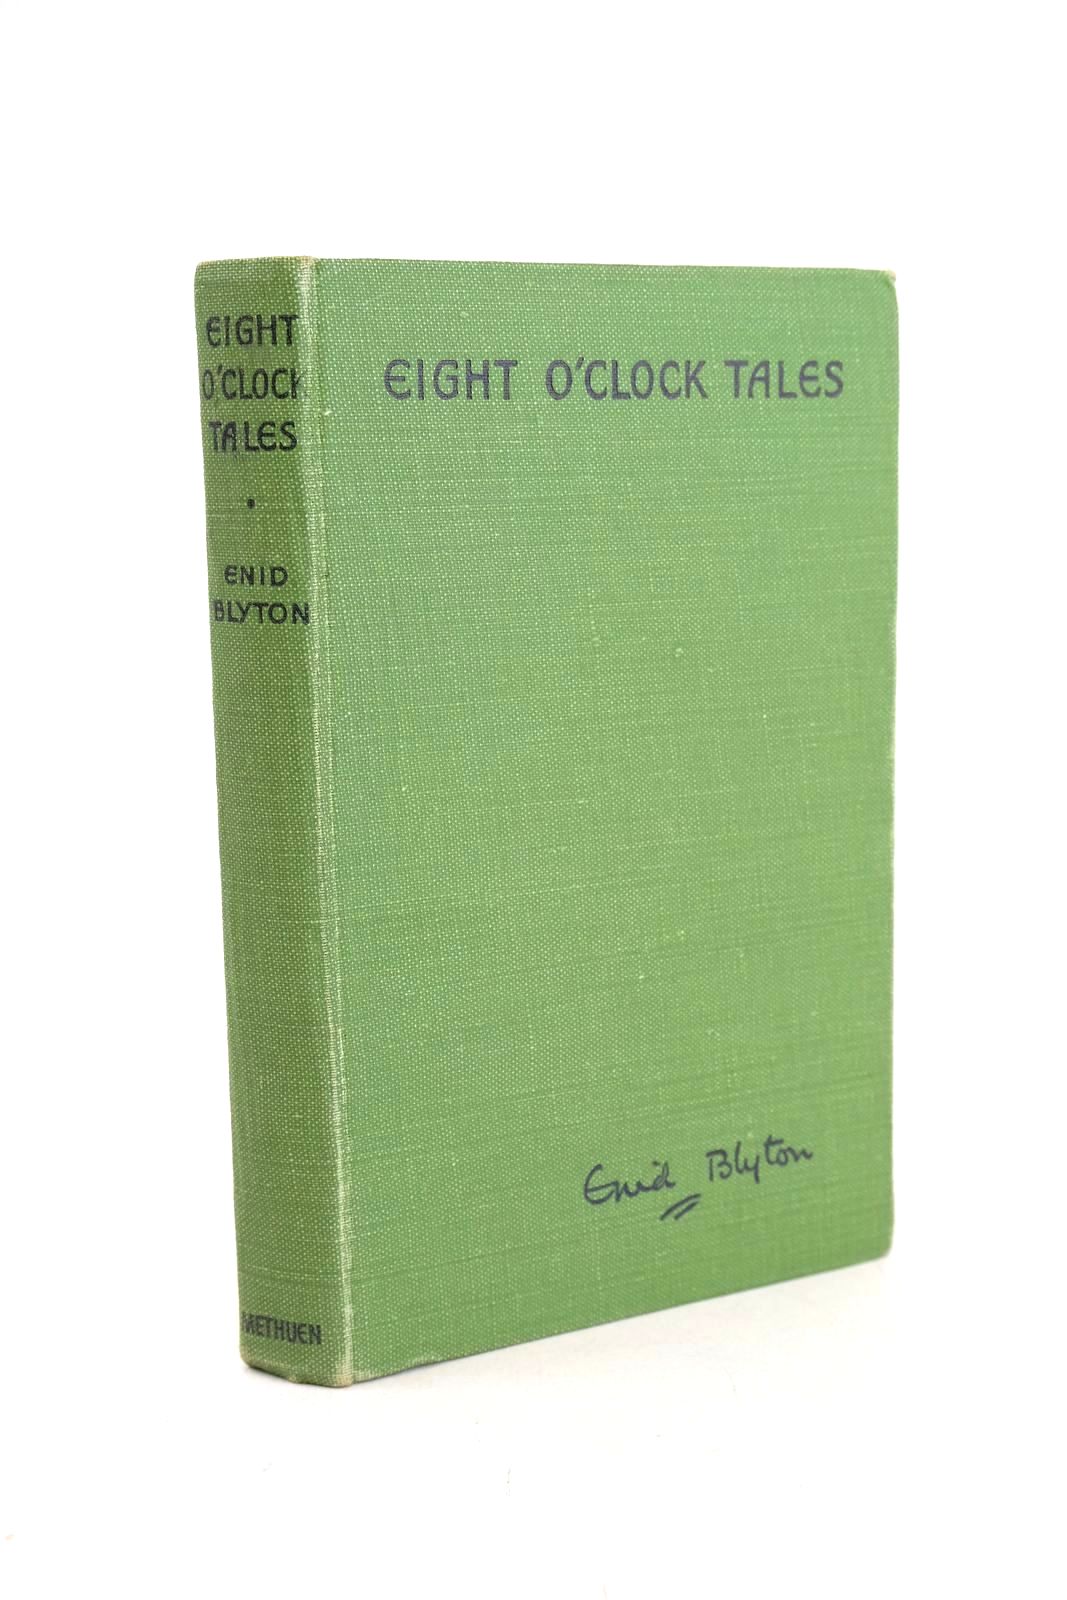 Photo of EIGHT O'CLOCK TALES- Stock Number: 1326752